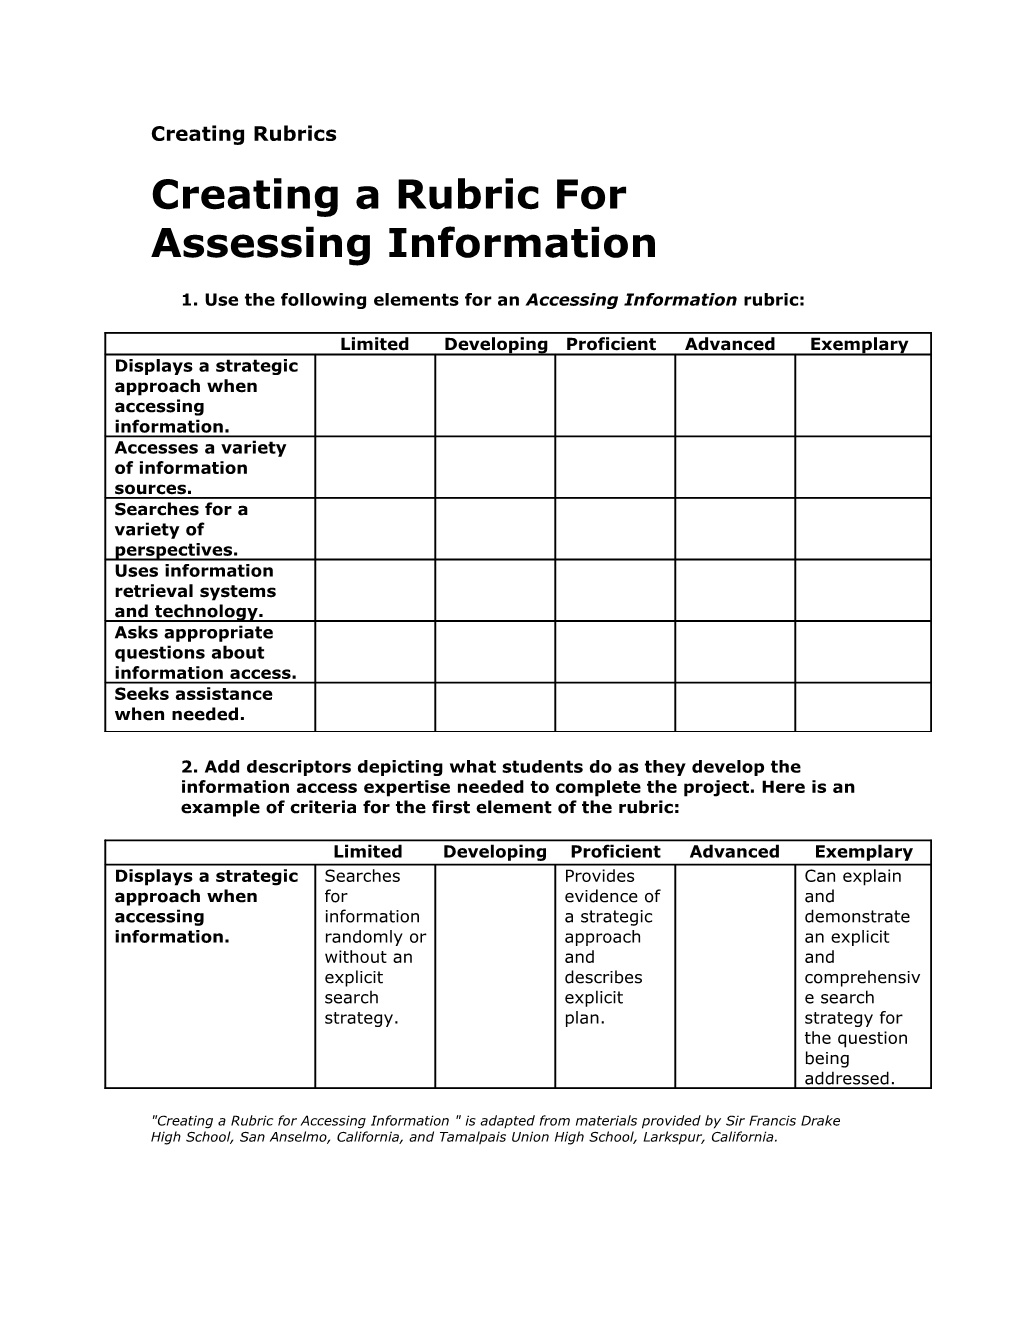 1. Use the Following Elements for an Accessing Information Rubric